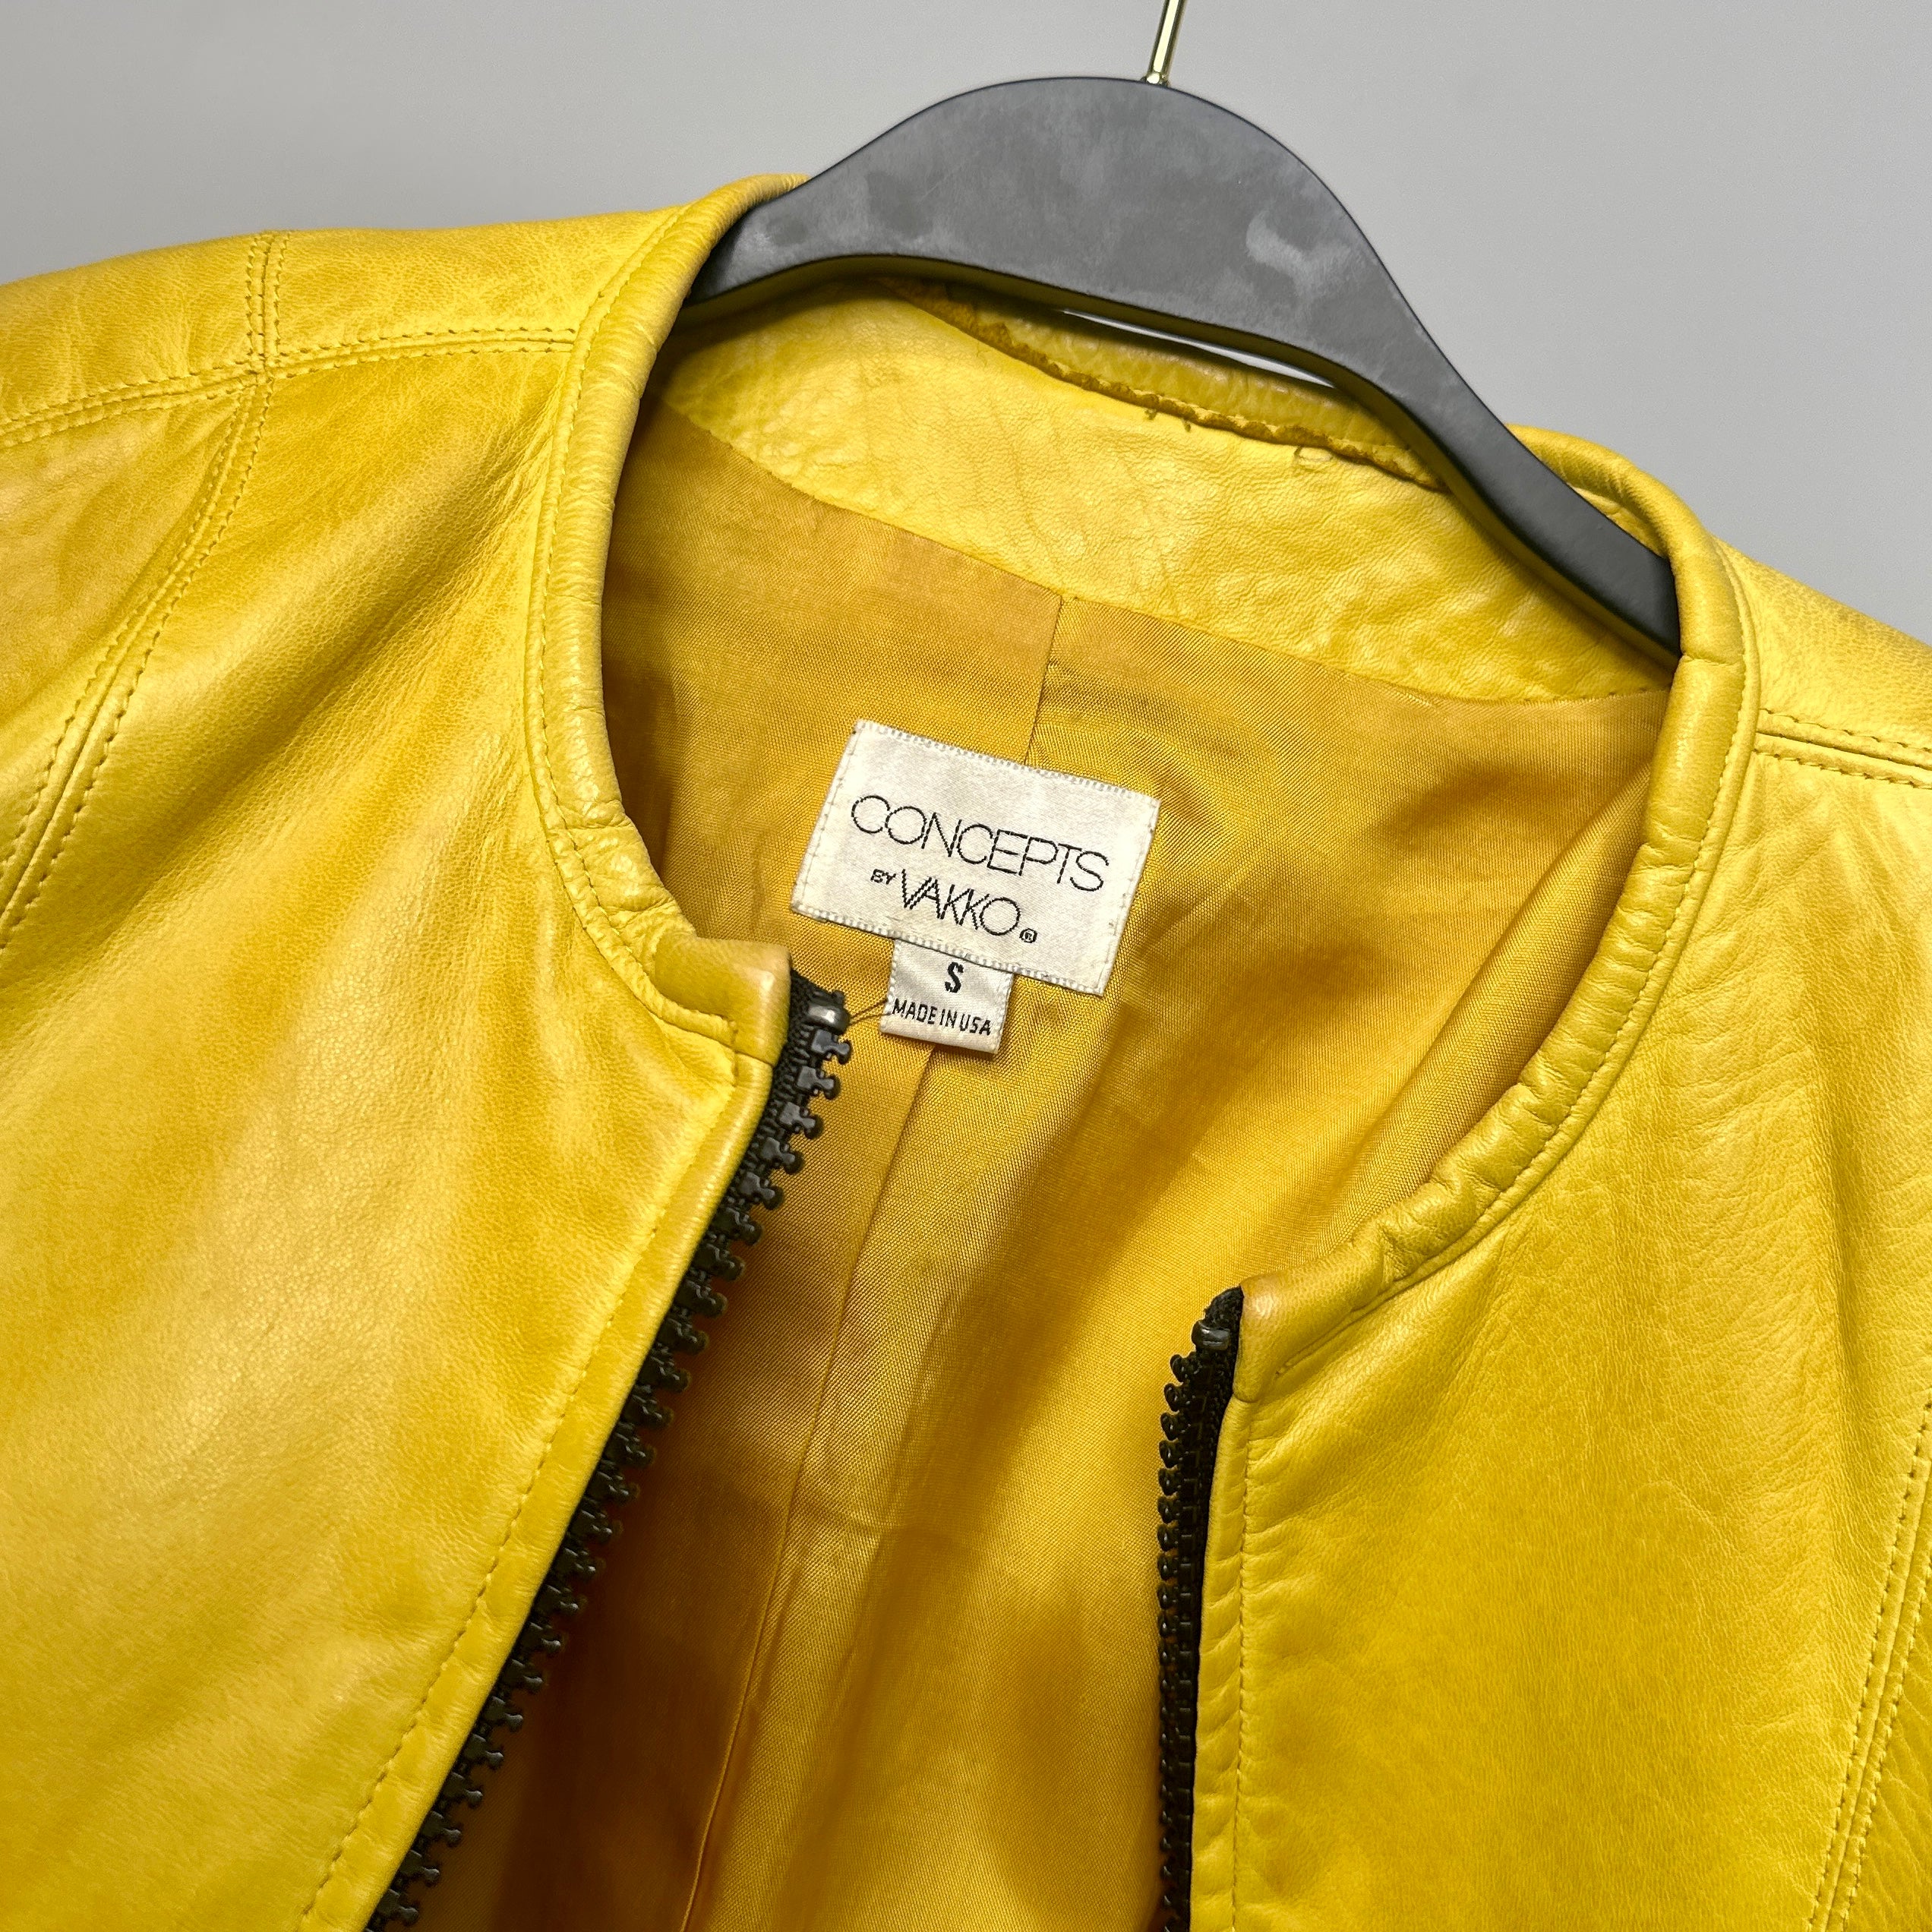 Vintage Yellow Leather Jacket (S/M)